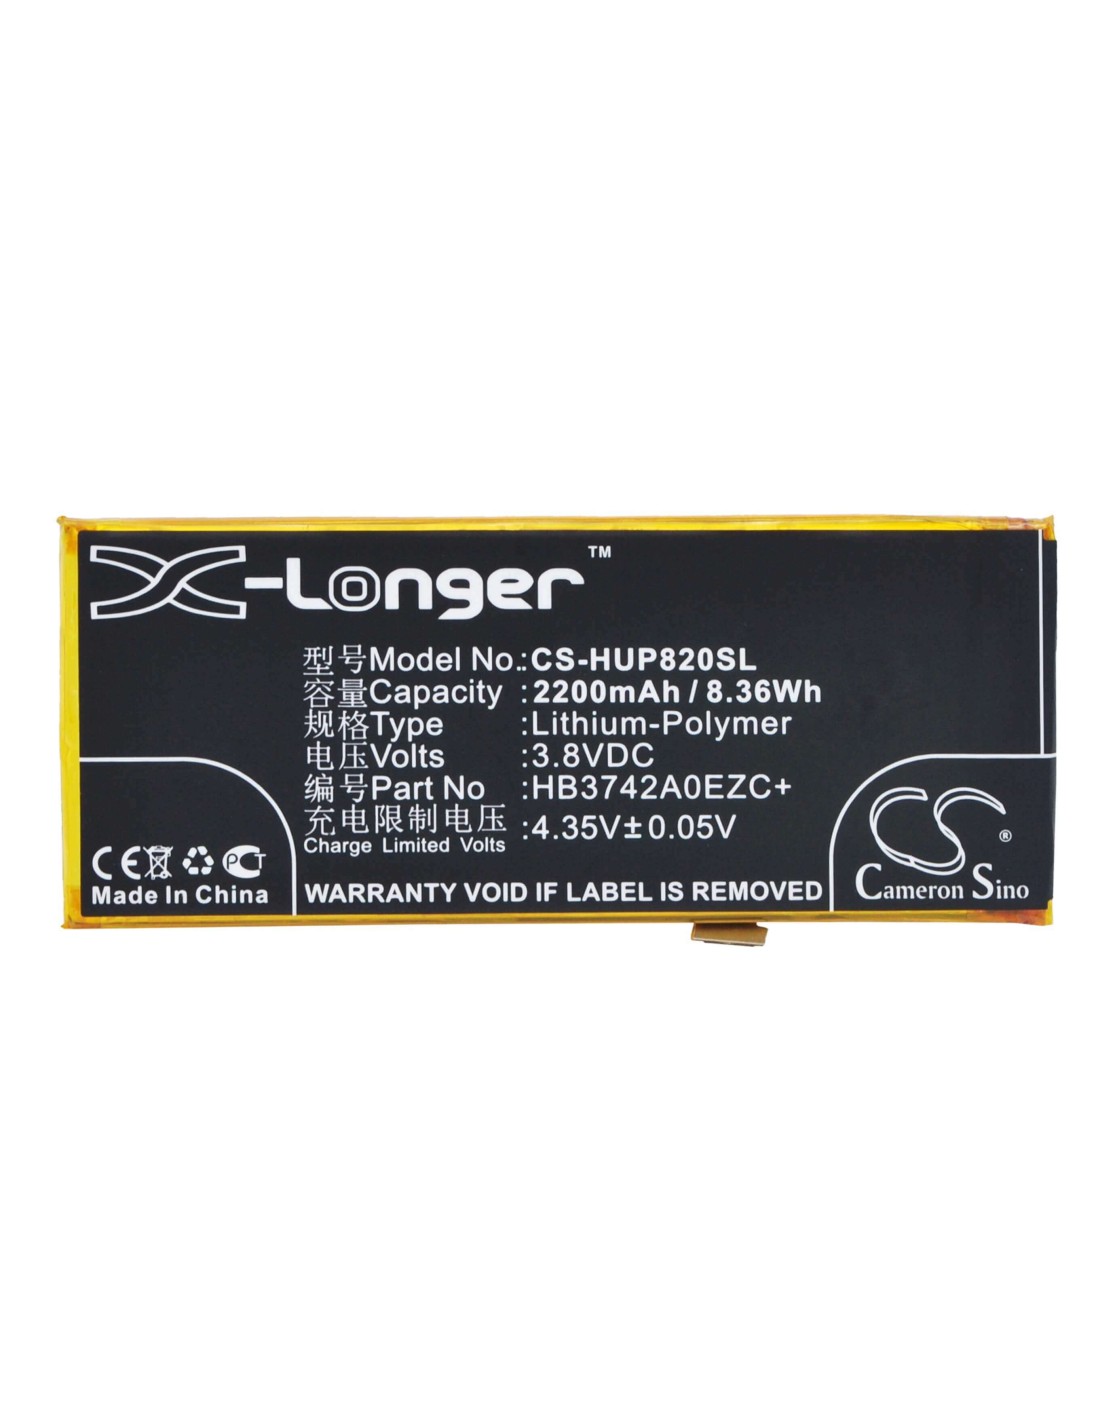 Battery for Huawei P8 Lite, ALE-L04, ALE-CL00 3.8V, 2200mAh - 8.36Wh